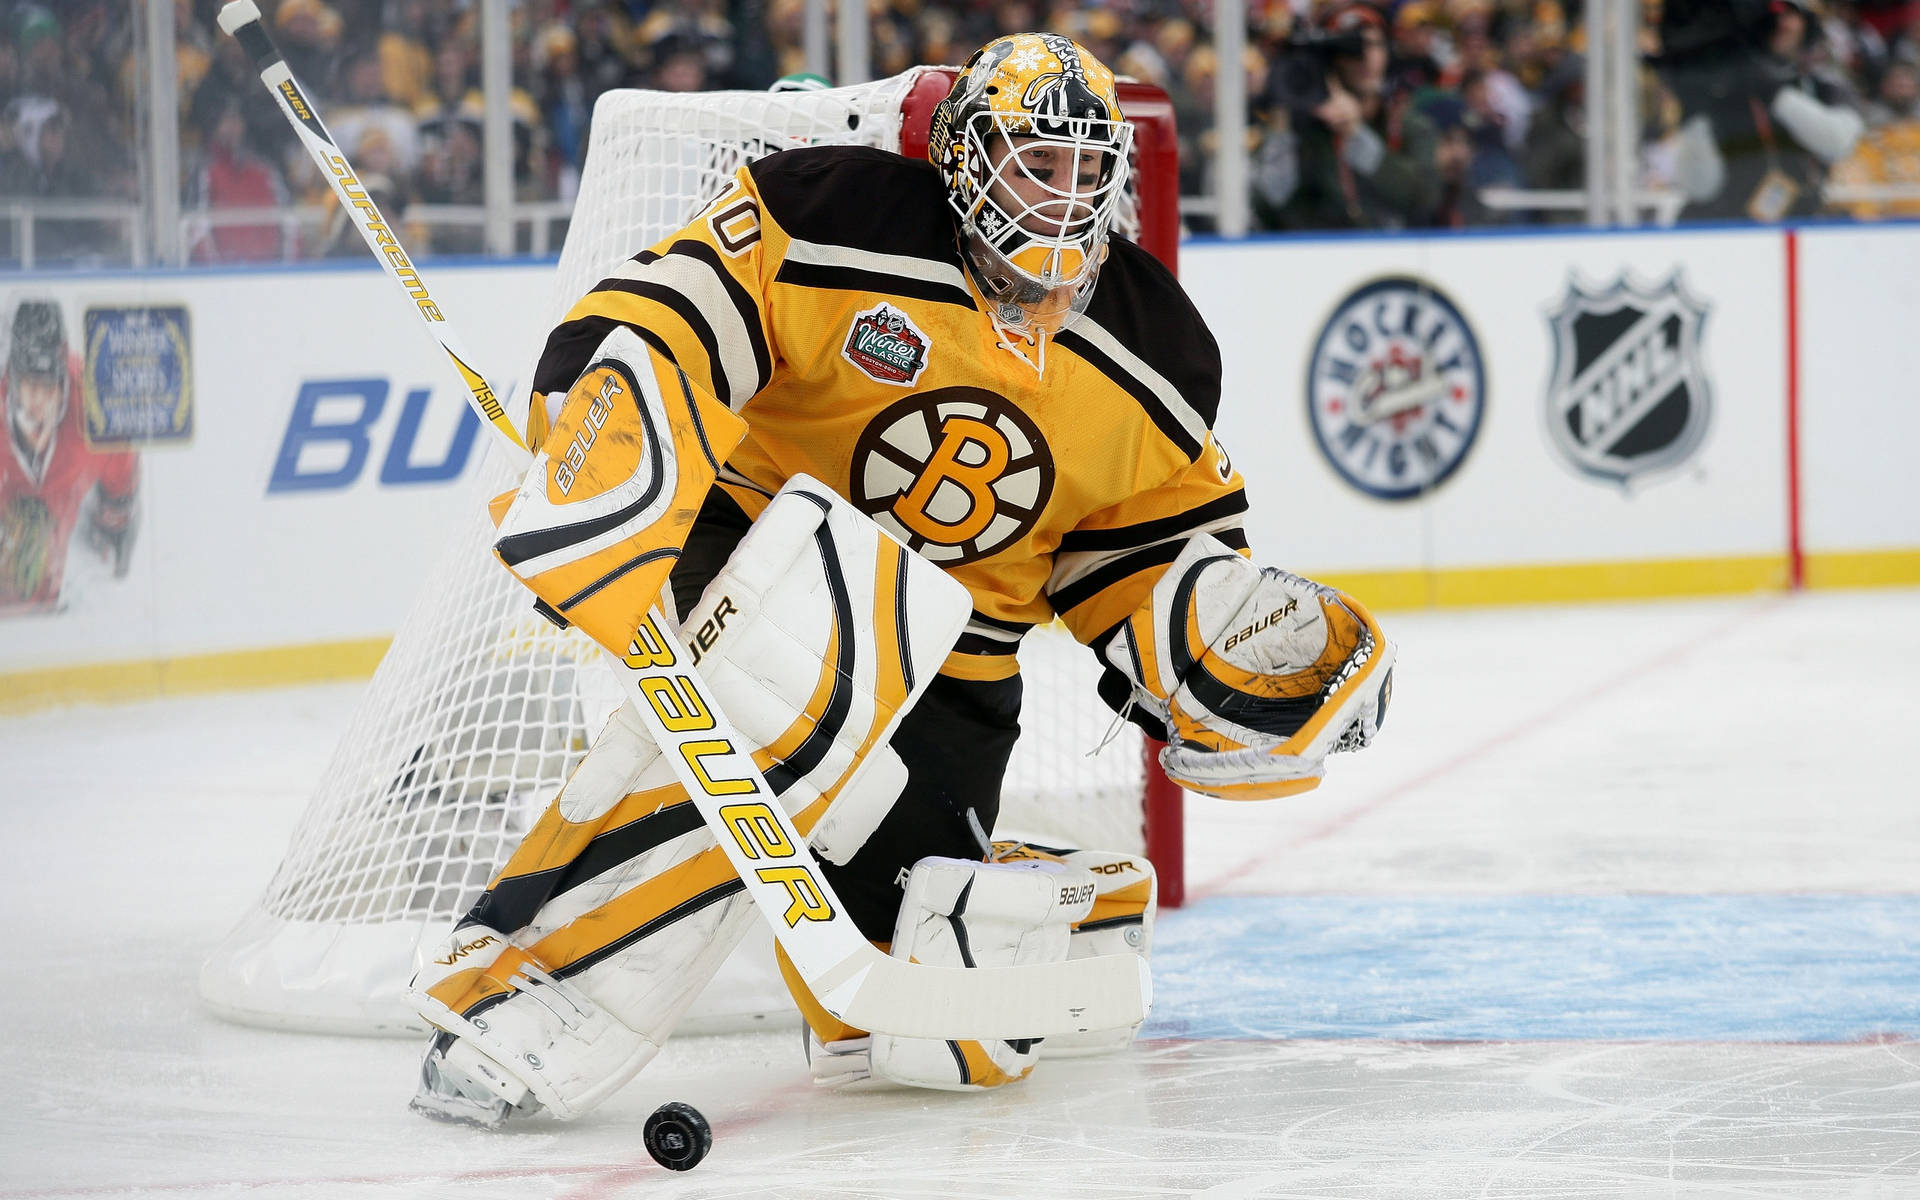 Jeremy Swayman Will Start Between Pipes As Bruins Face Sabres